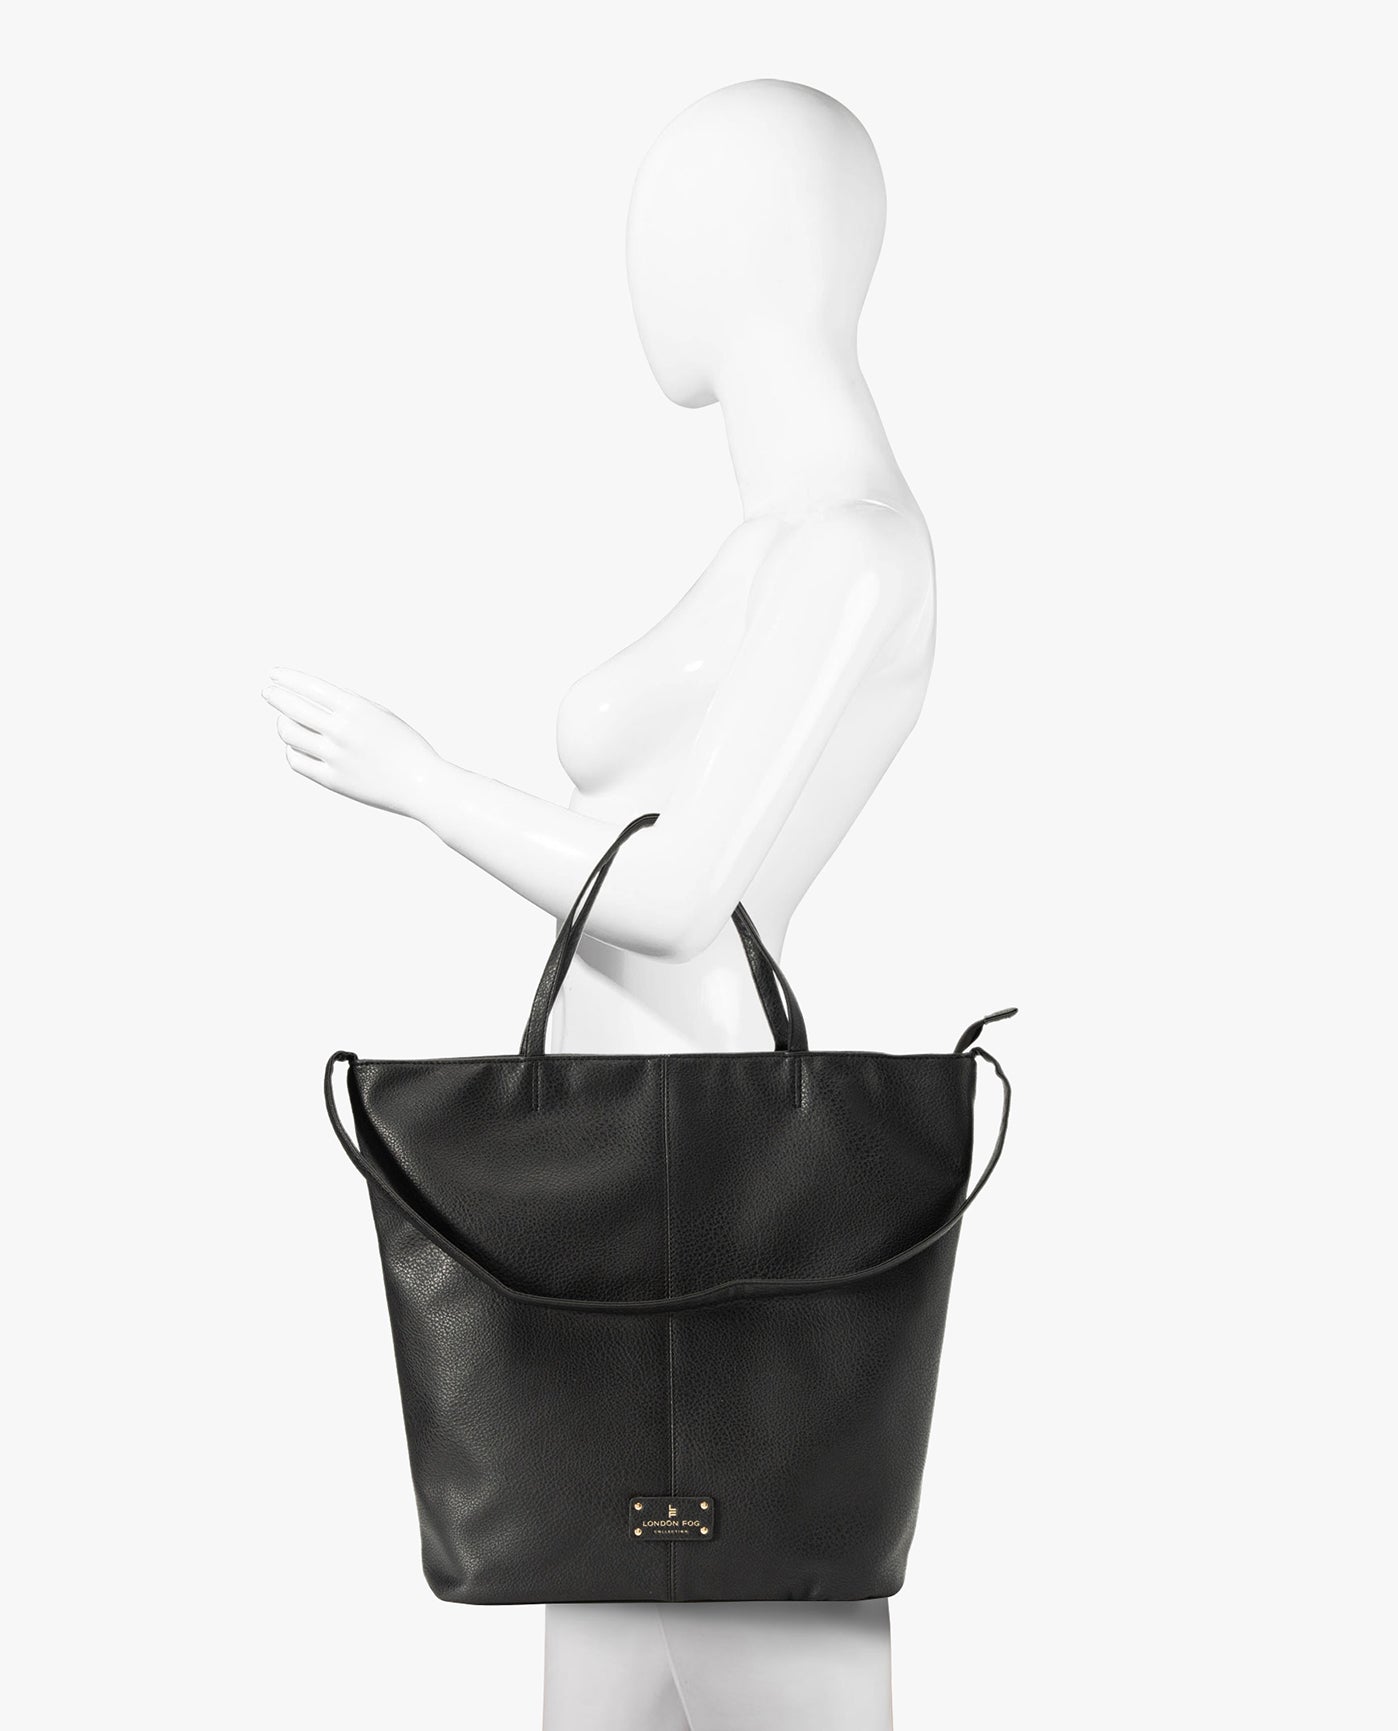 ALT VIEW OF LAURA LARGE TOTE | BLACK